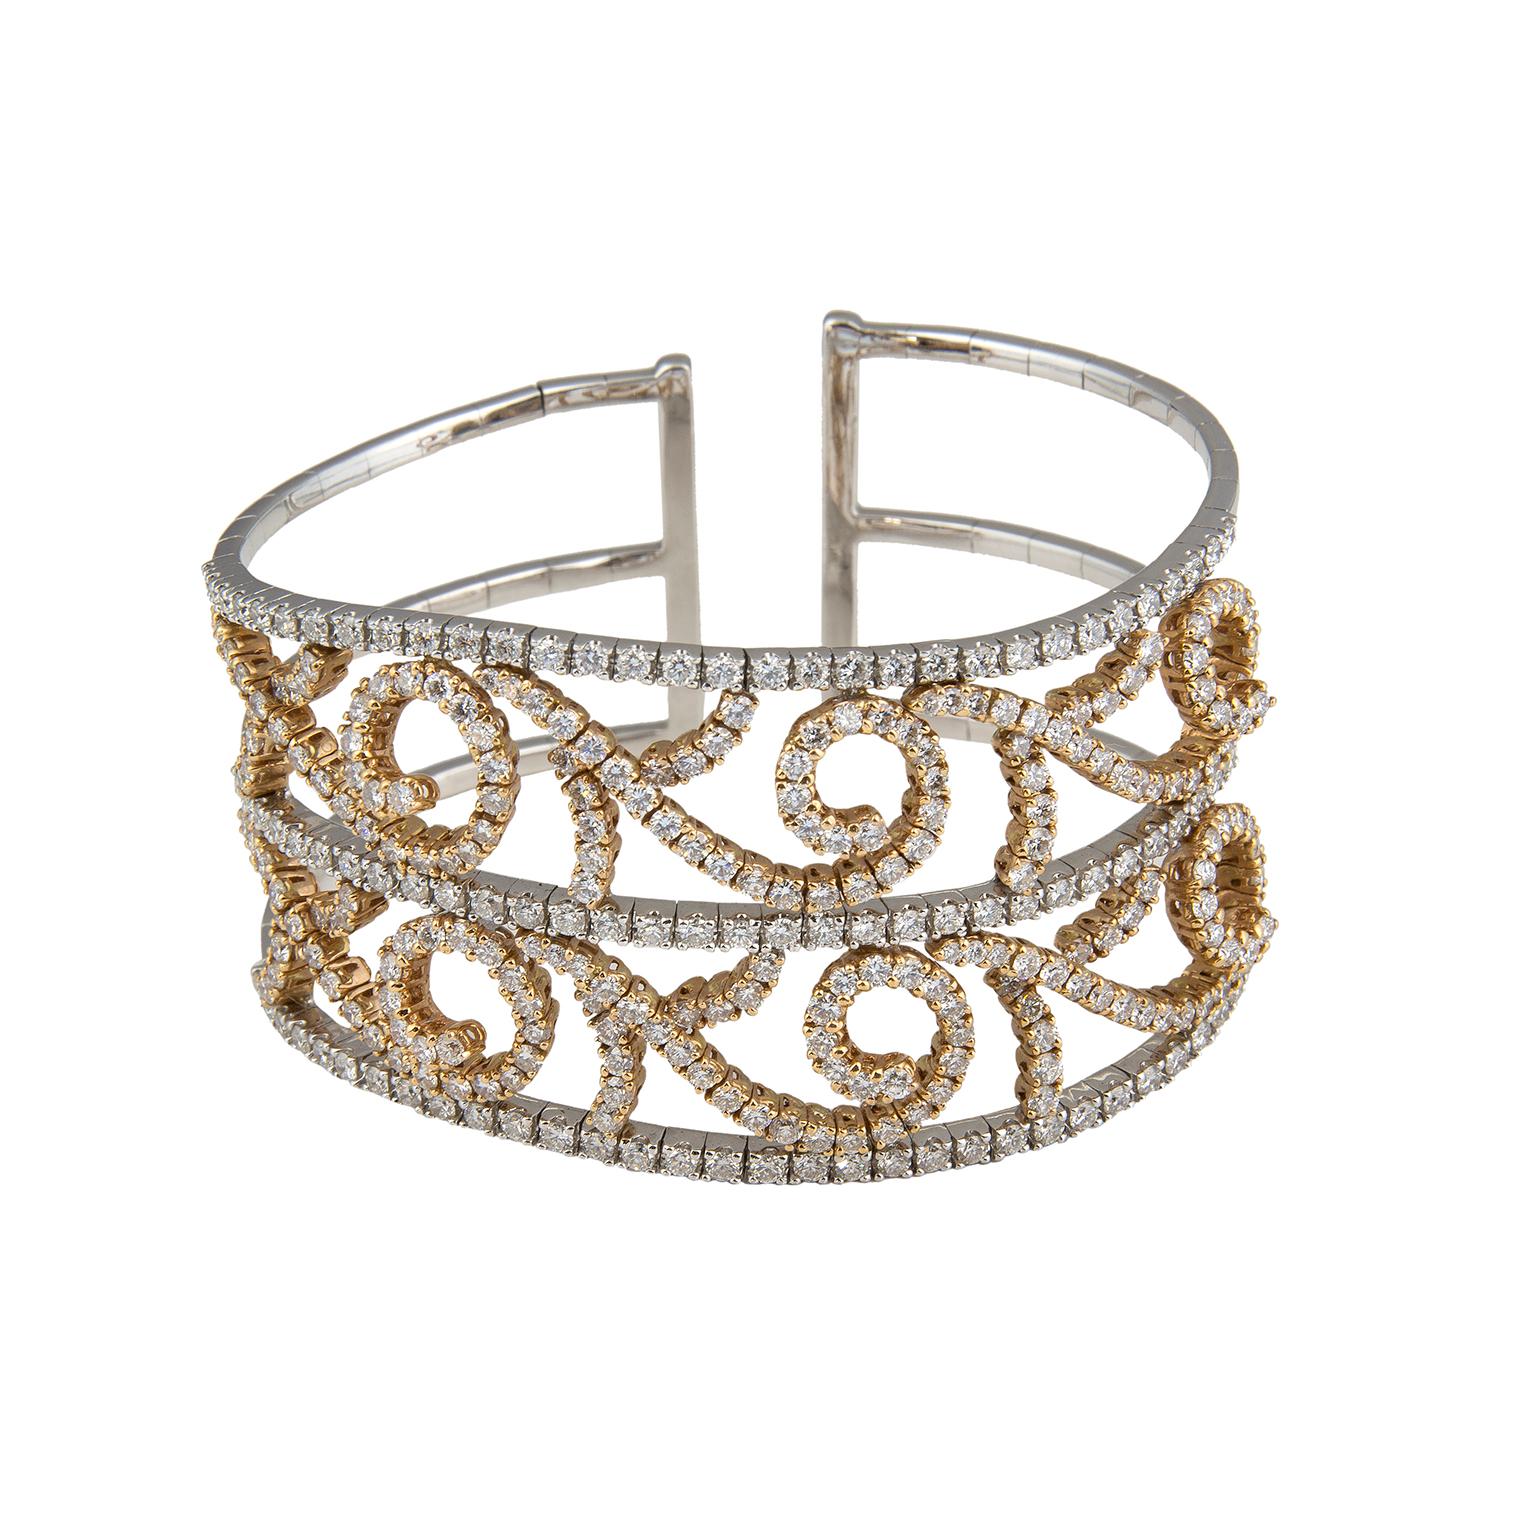 Cuff bracelet in 18 Karat white and rose gold set with 318 diamonds, with a total weight of 8.80 carats.
Circumference: 17 cm (6.69 in)
Width: 3,5 cm (1.38 in)